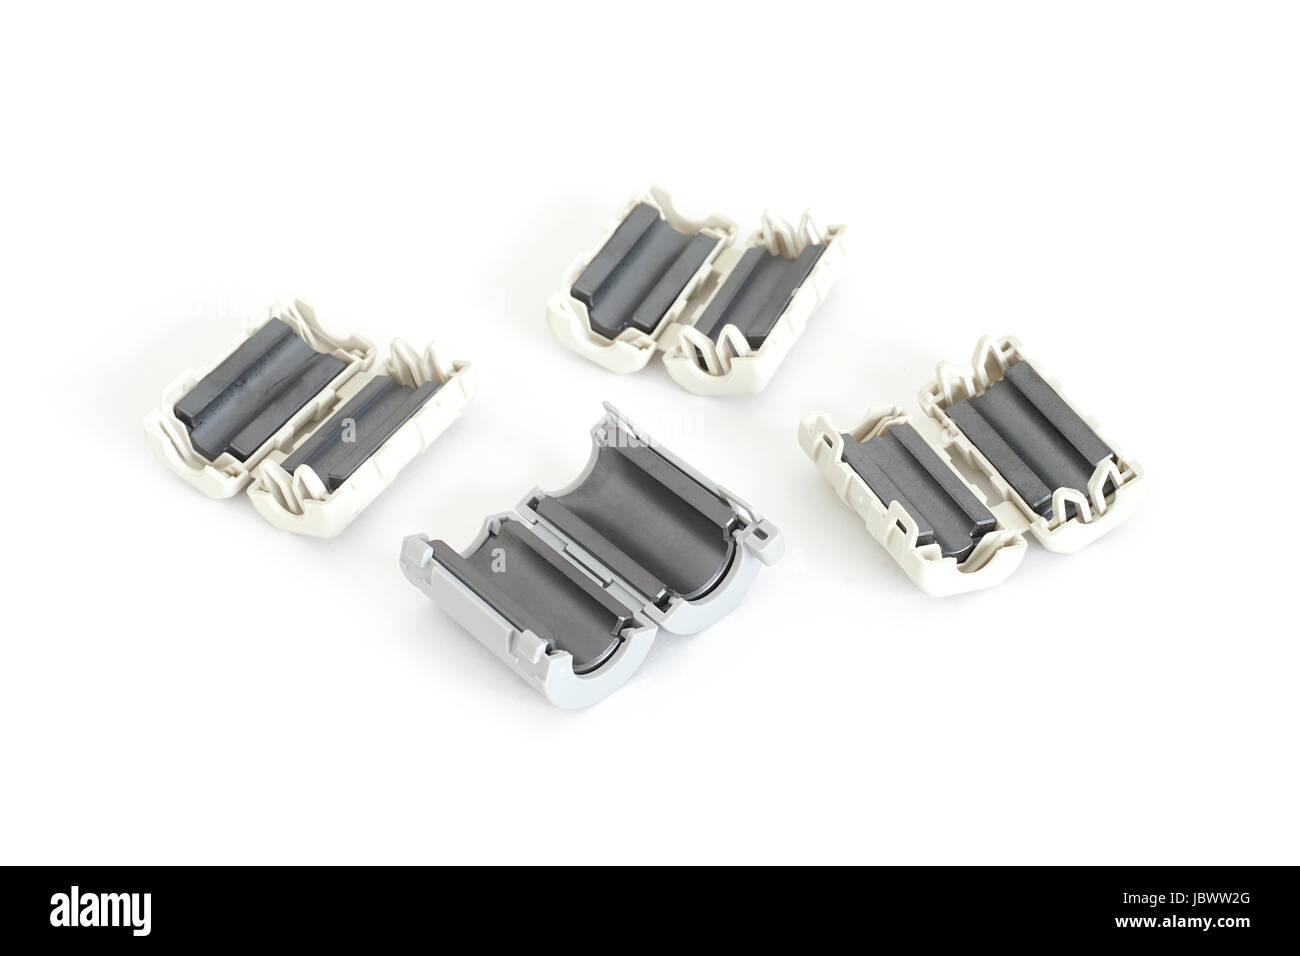 EMC, RFI and Noise reduction device - Ferrite Clamp or Clamp Filter Stock Photo